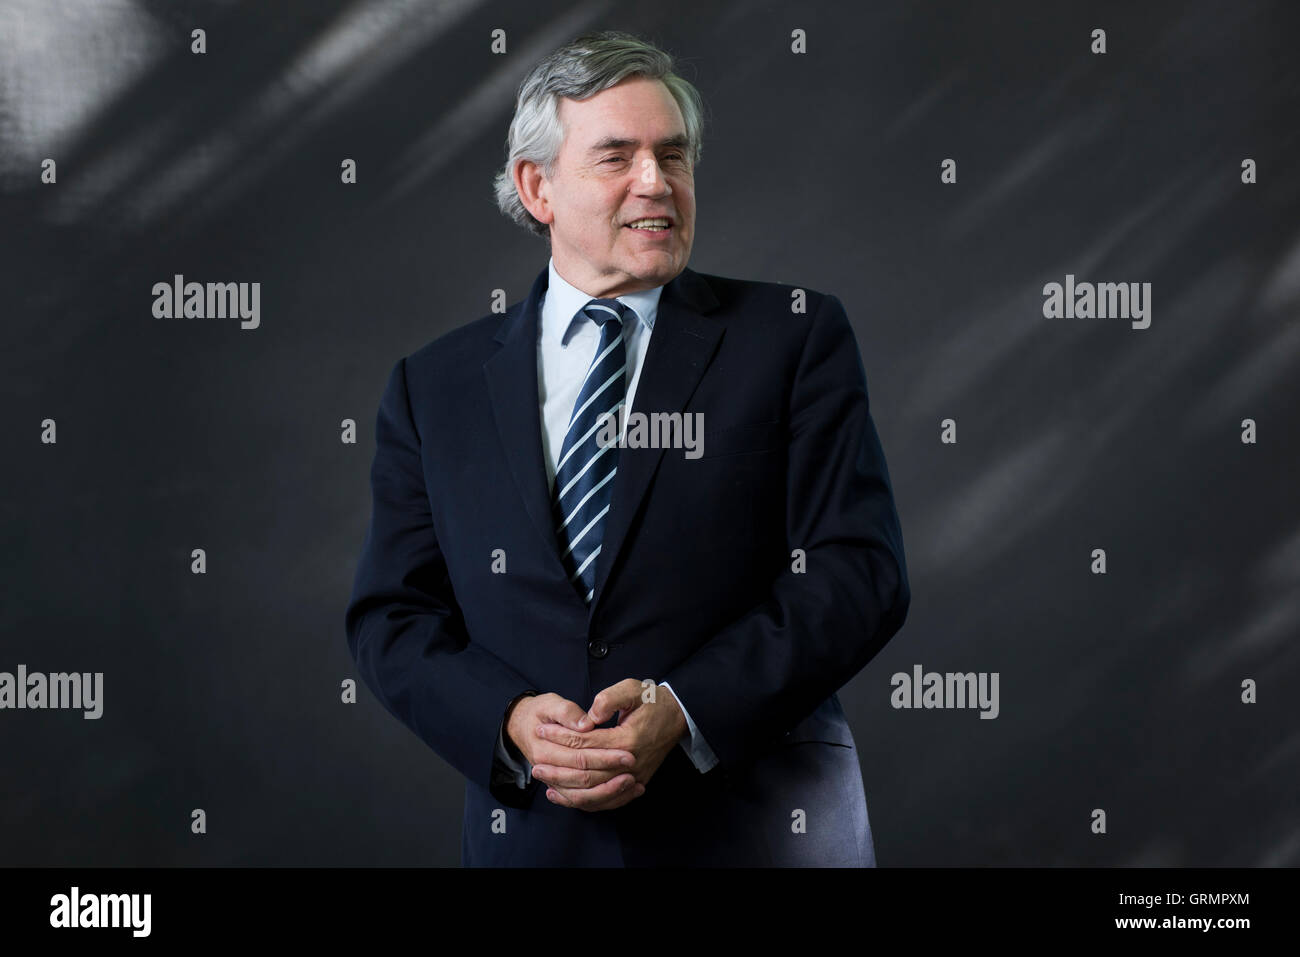 British politician and former Prime Minister of the United Kingdom and Leader of the Labour Party Gordon Brown. Stock Photo